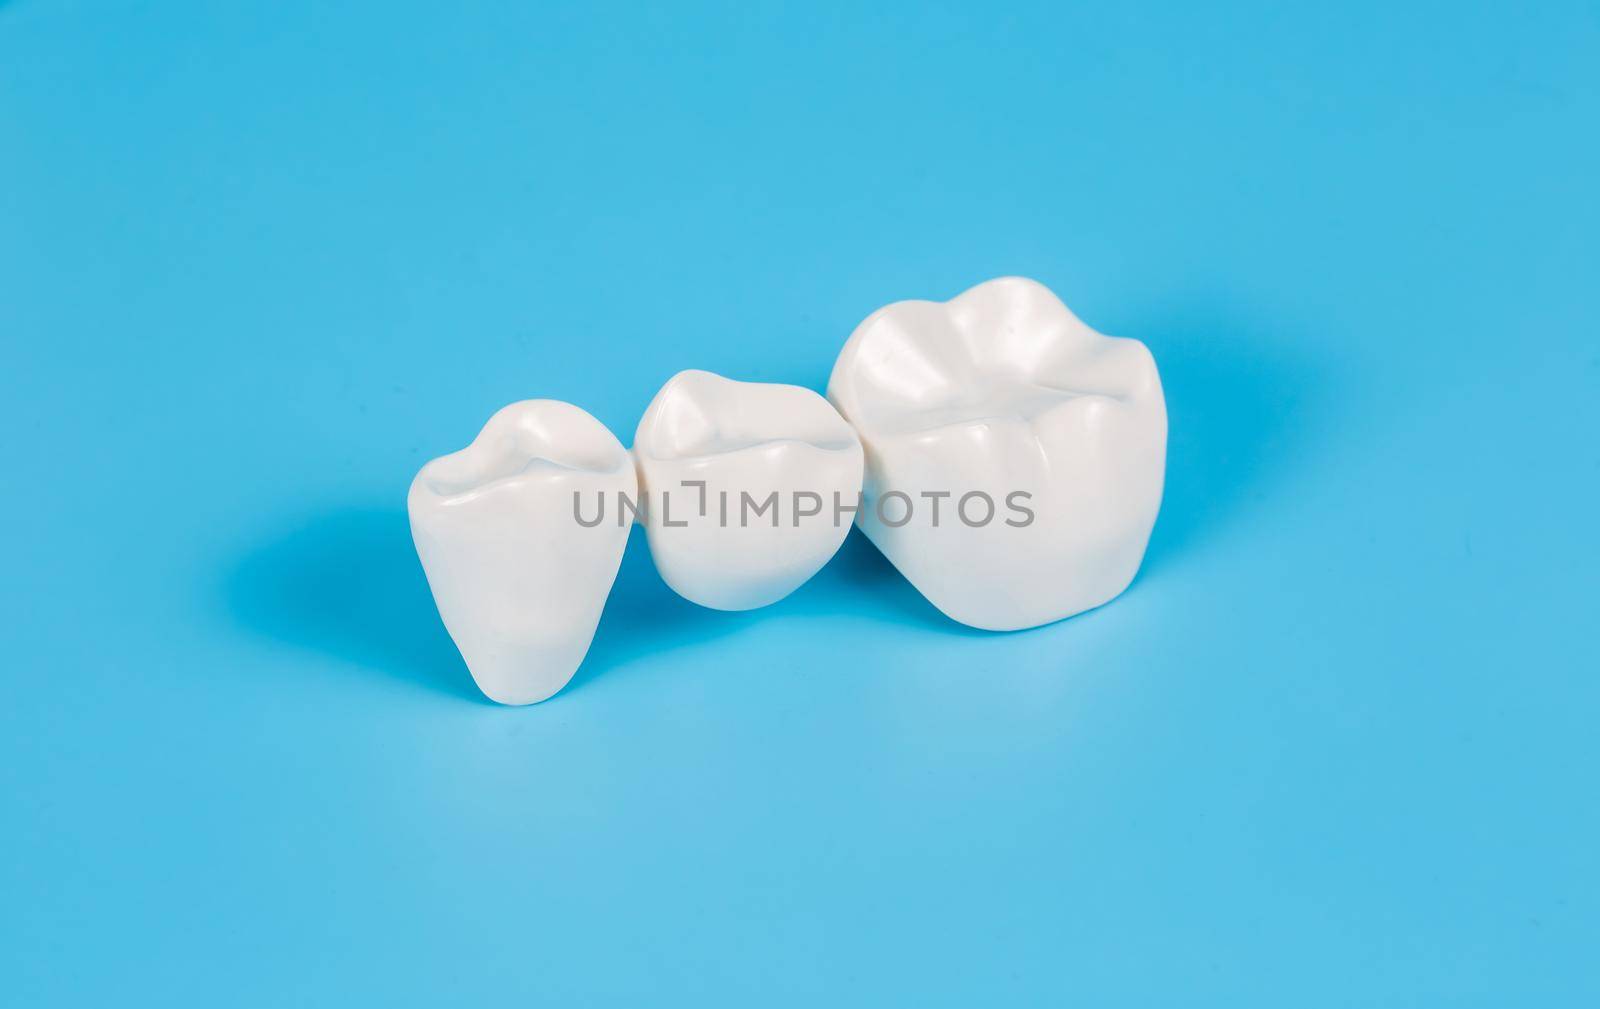 Plastic dental crowns, imitation of a dental prosthesis of a dental bridge for three teeth on a blue background.Visual aid for dentists and patients.